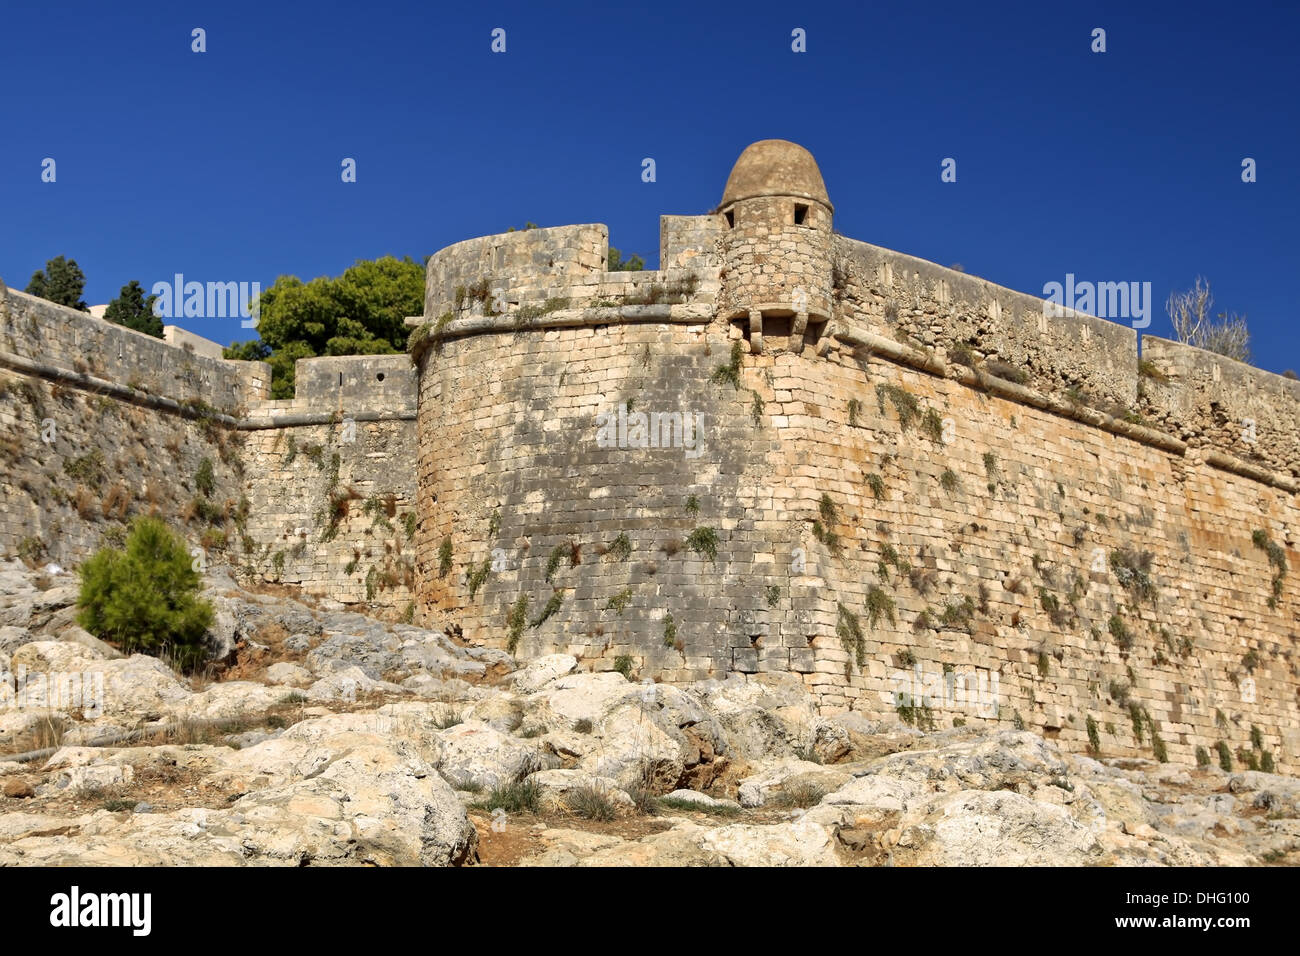 A view of the ancient Venetian fortifications, Palekastro, Rethymno region, on the island of Crete, Greece. Stock Photo